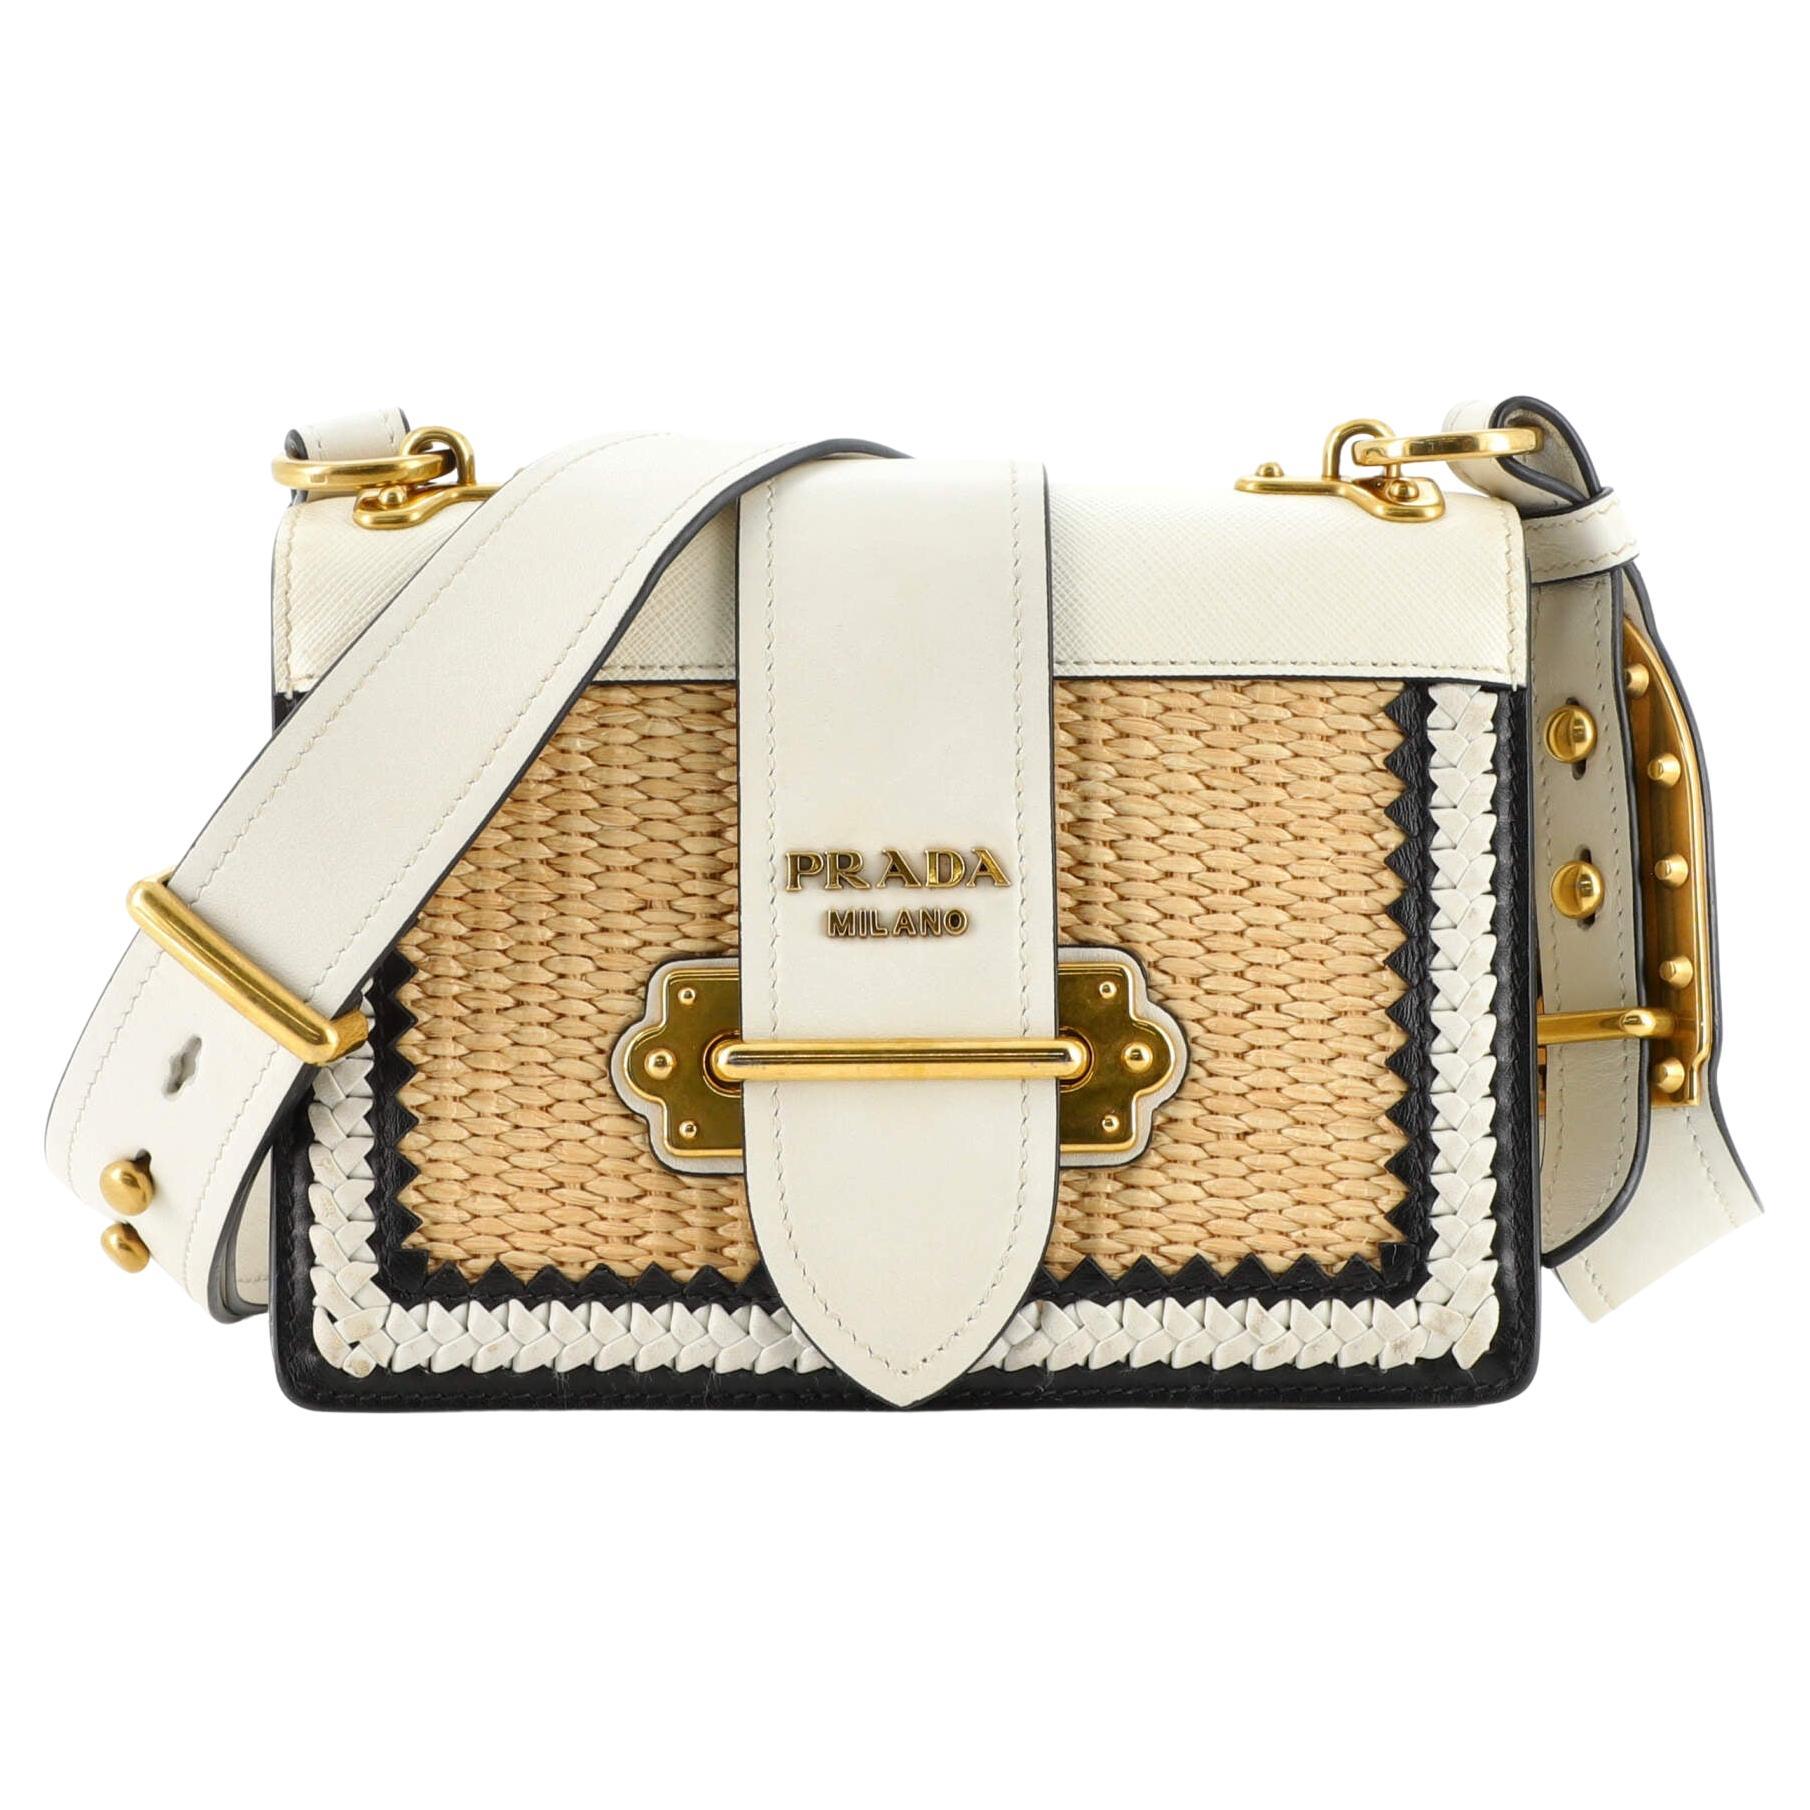 Sold at Auction: PRADA Cahier Yellow And Black Chain Shoulder Bag